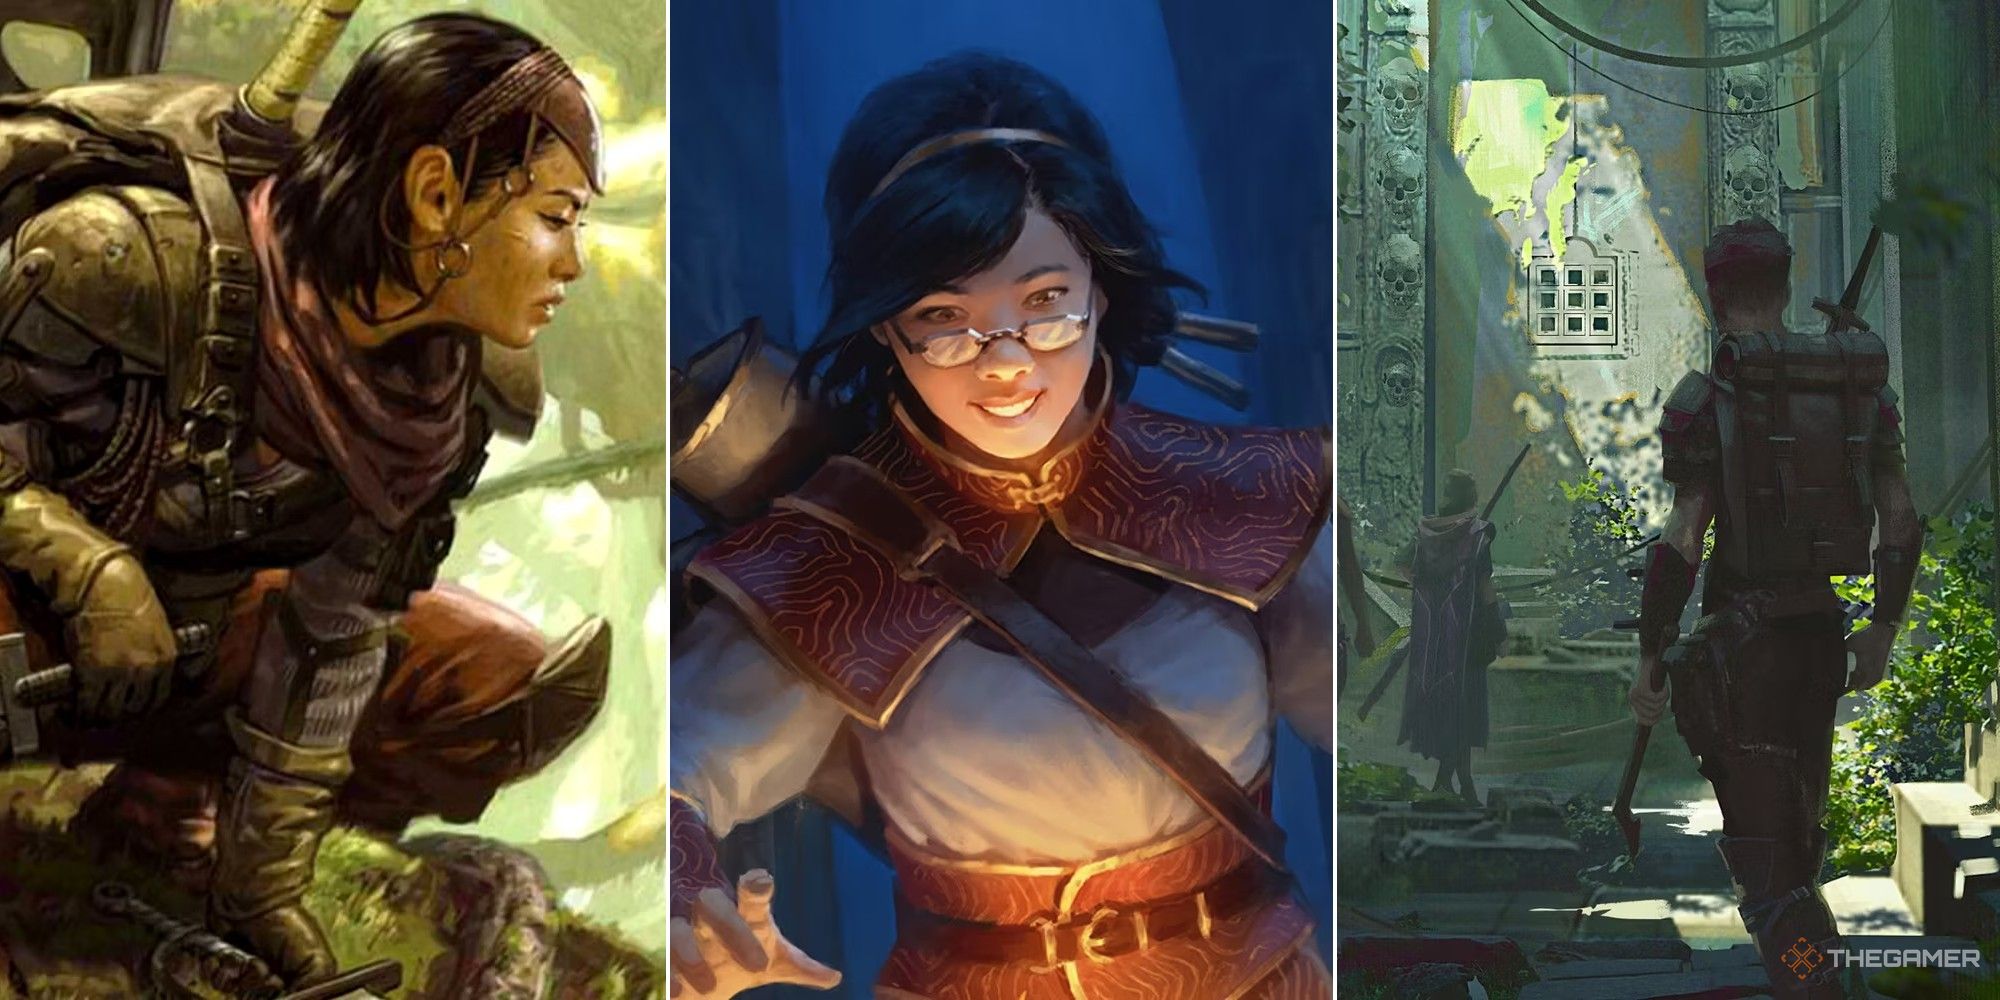 Dungeons & Dragons collage showing a ranger, a woman looking at a scroll, and a party exlporing ruins